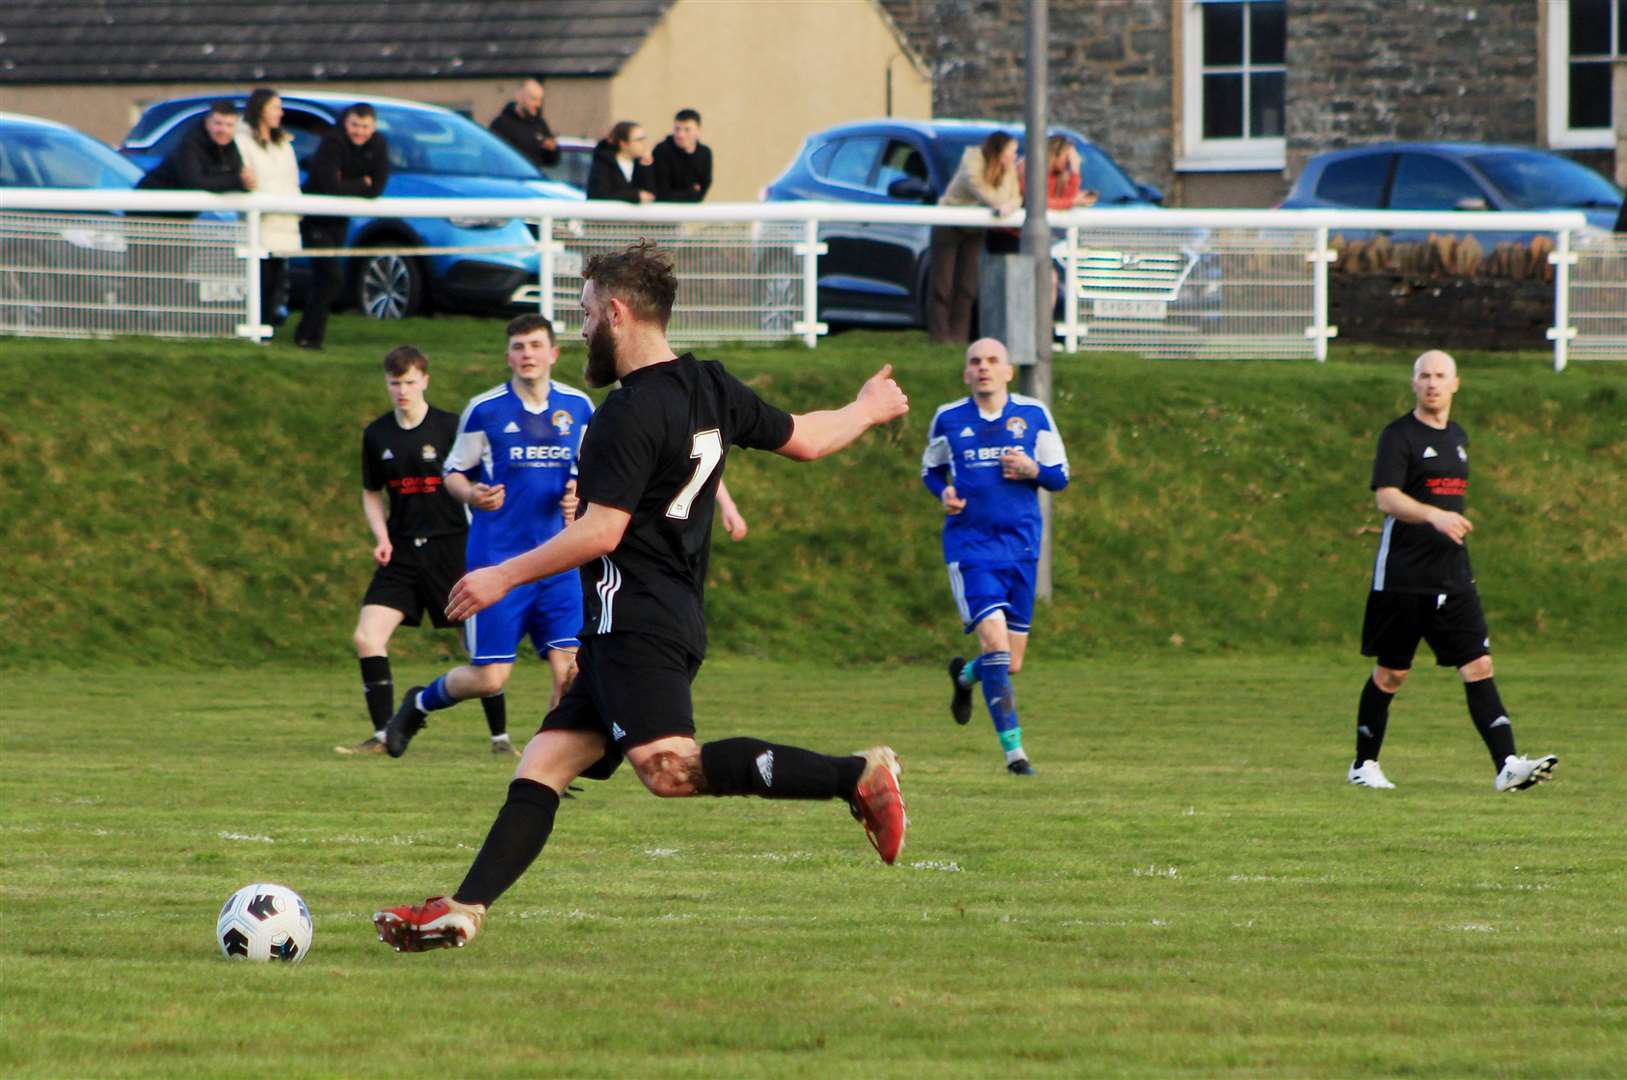 Bobby Gunn was praised for his finishing ability after another win for Lybster in Caithness AFA Division Two. Picture: Alan Hendry